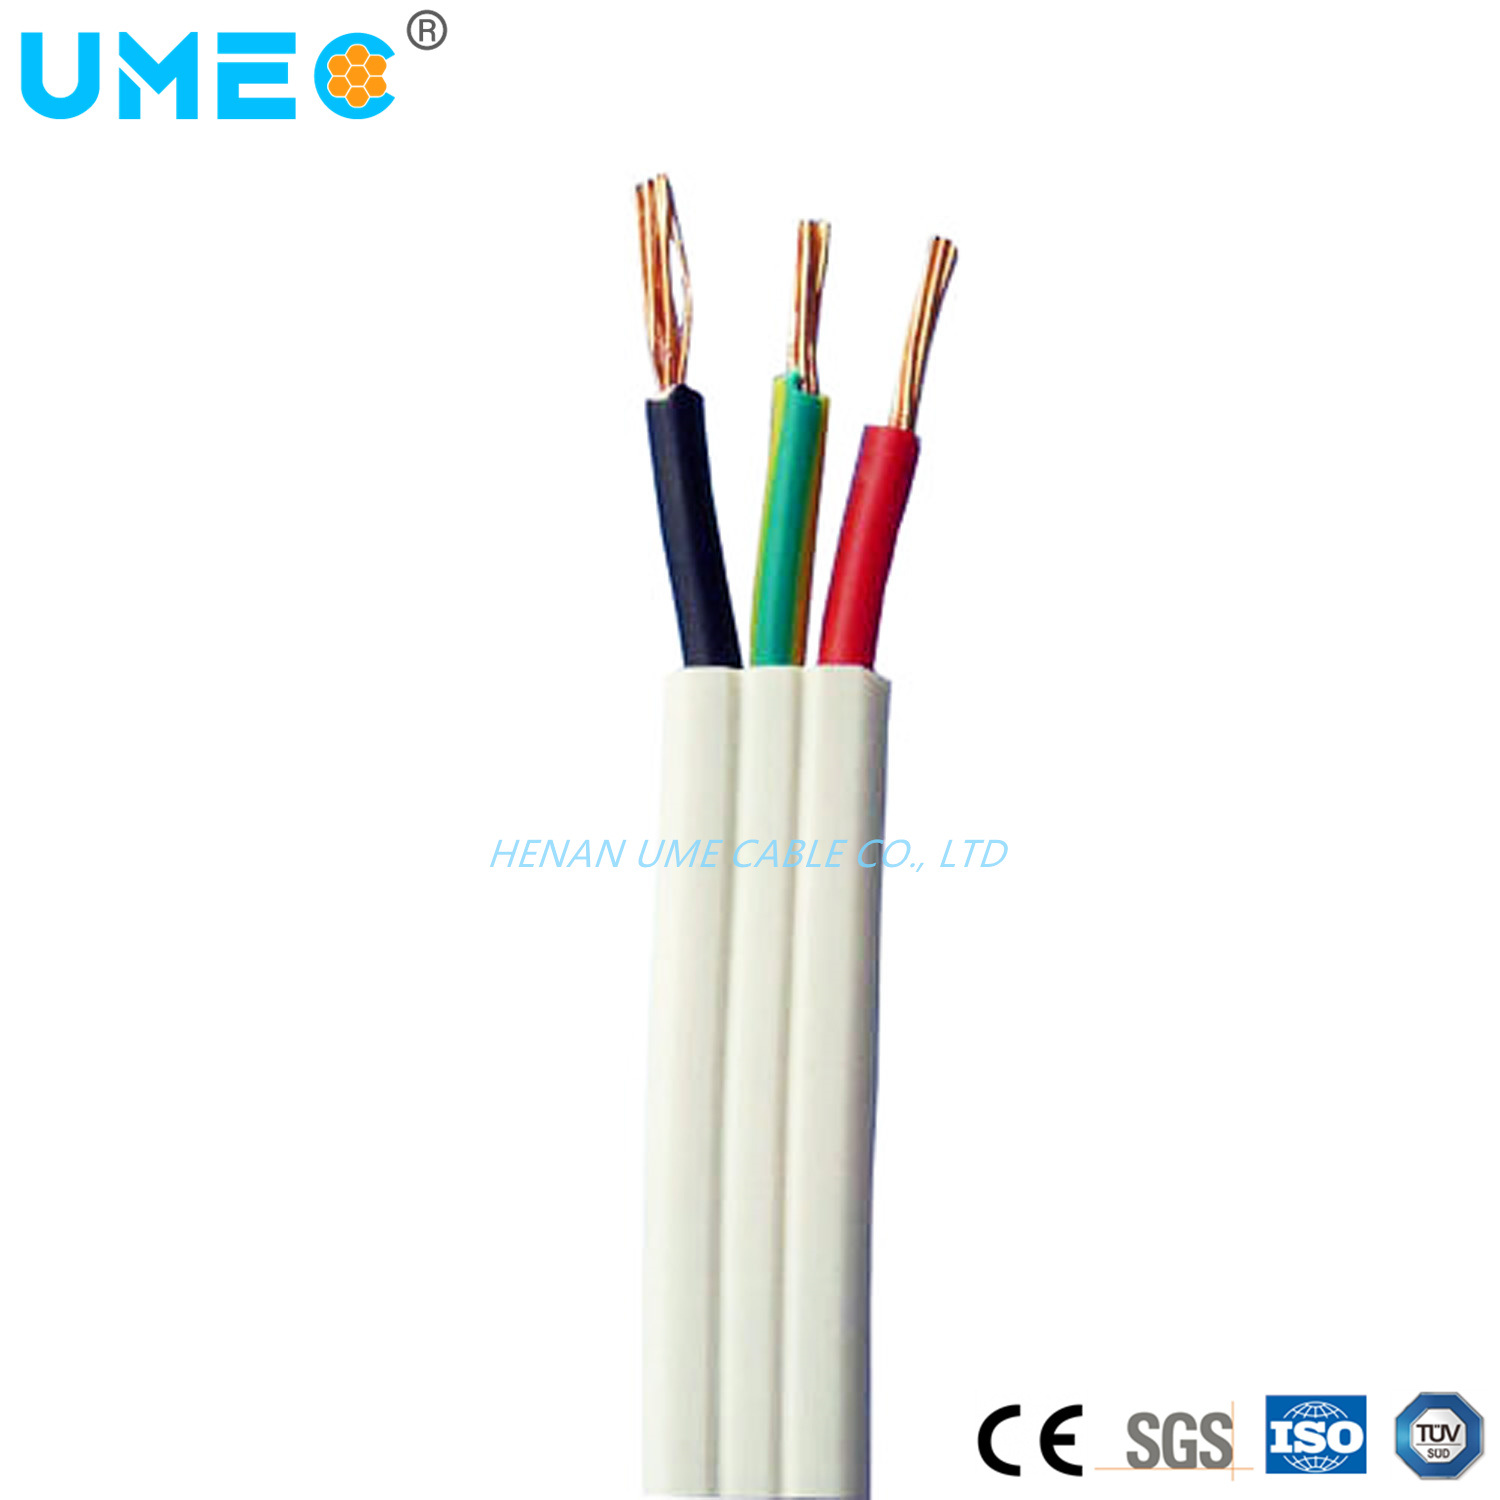 SGS Approval 2 3 Core Cable 1.5mm 2.5mm 6mm PVC Insulated Twin & Earth TPS Flat Cable